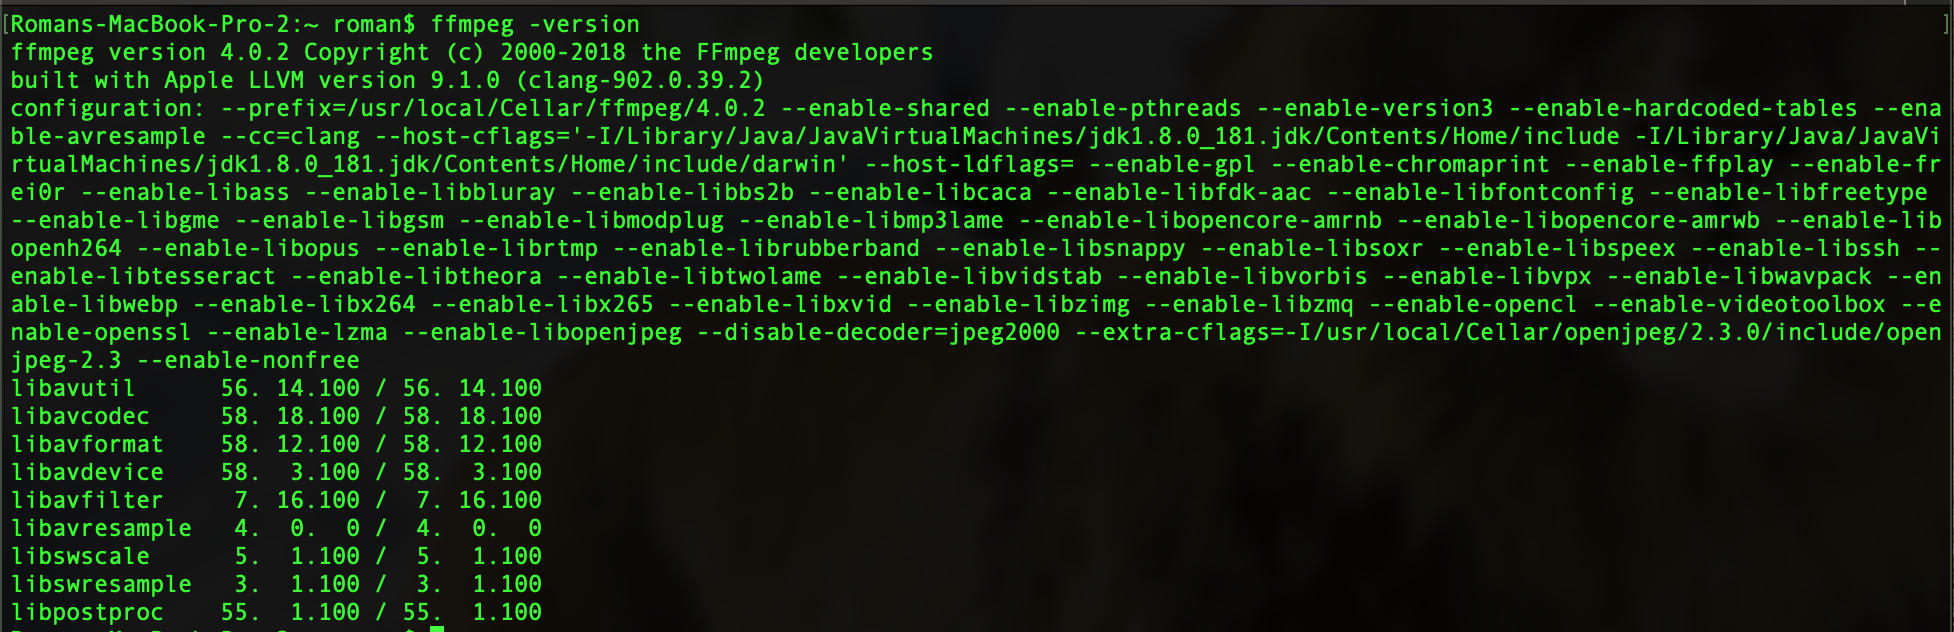 Checking the FFmpeg version